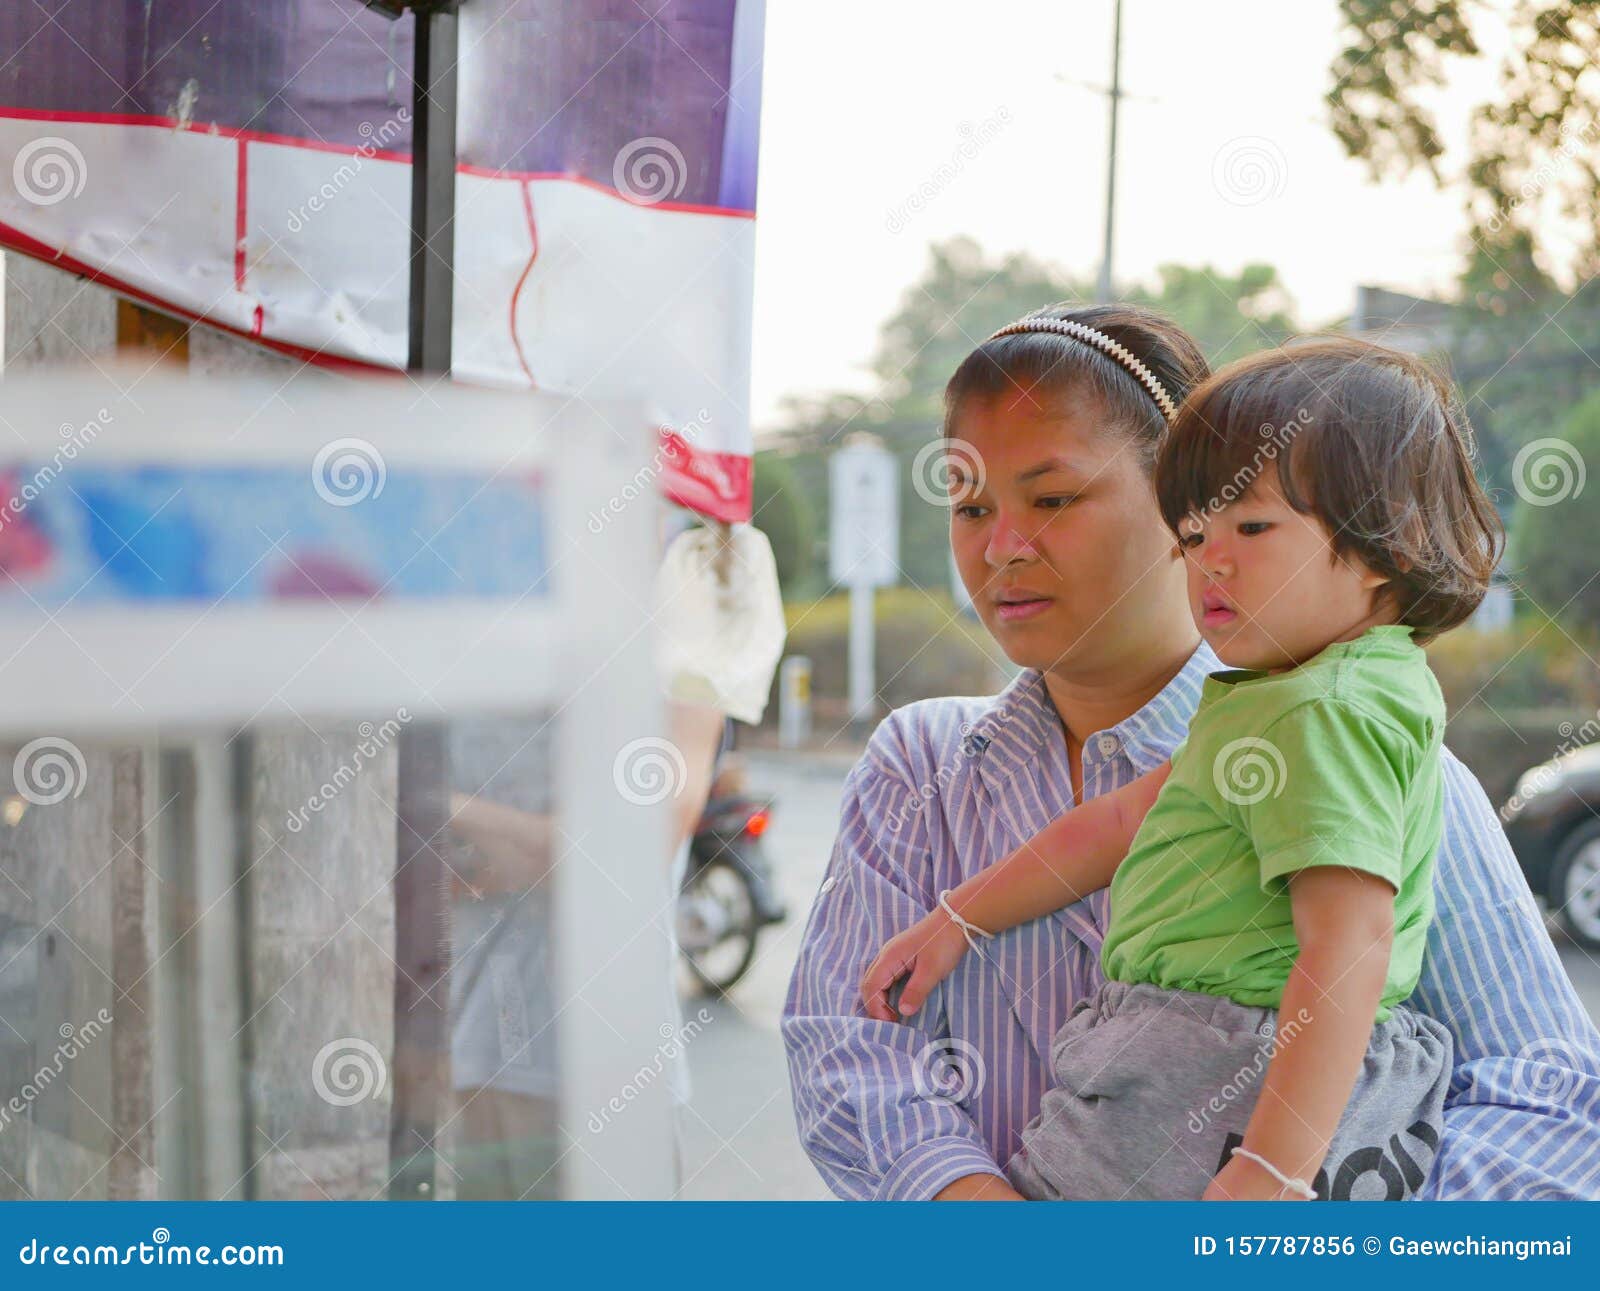 little asian baby girl together with her mother watching food vender selling / cooking street food